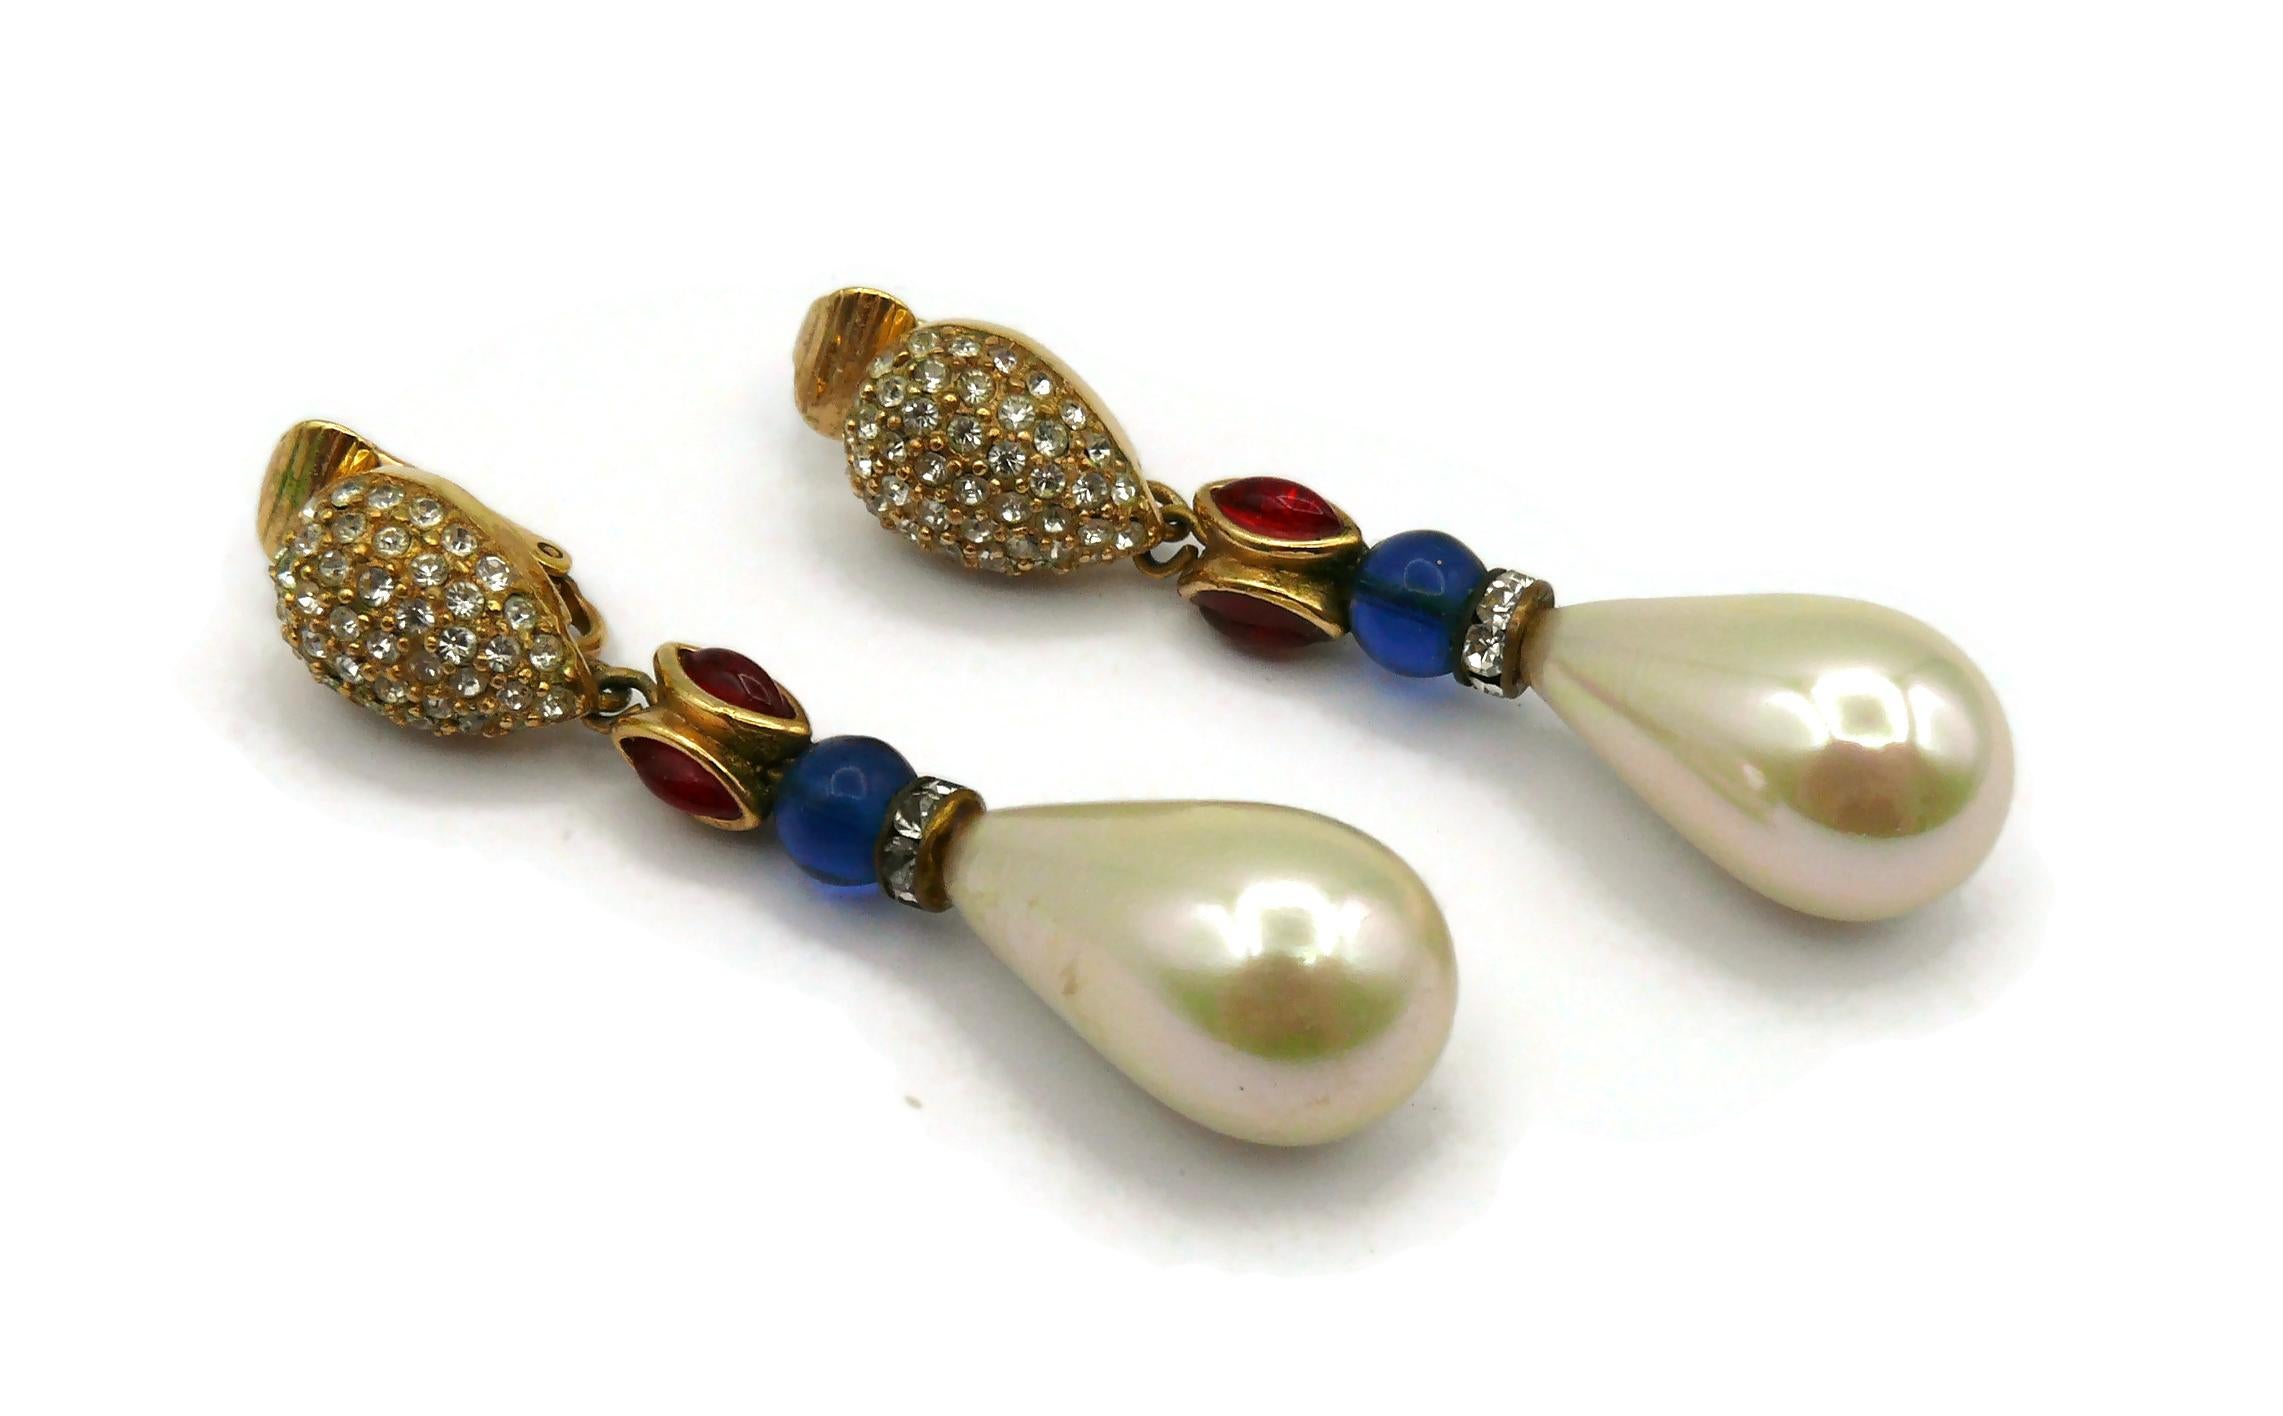 CHRISTIAN DIOR Vintage Glass & Faux Pearl Jewelled Dangling Earrings In Good Condition For Sale In Nice, FR